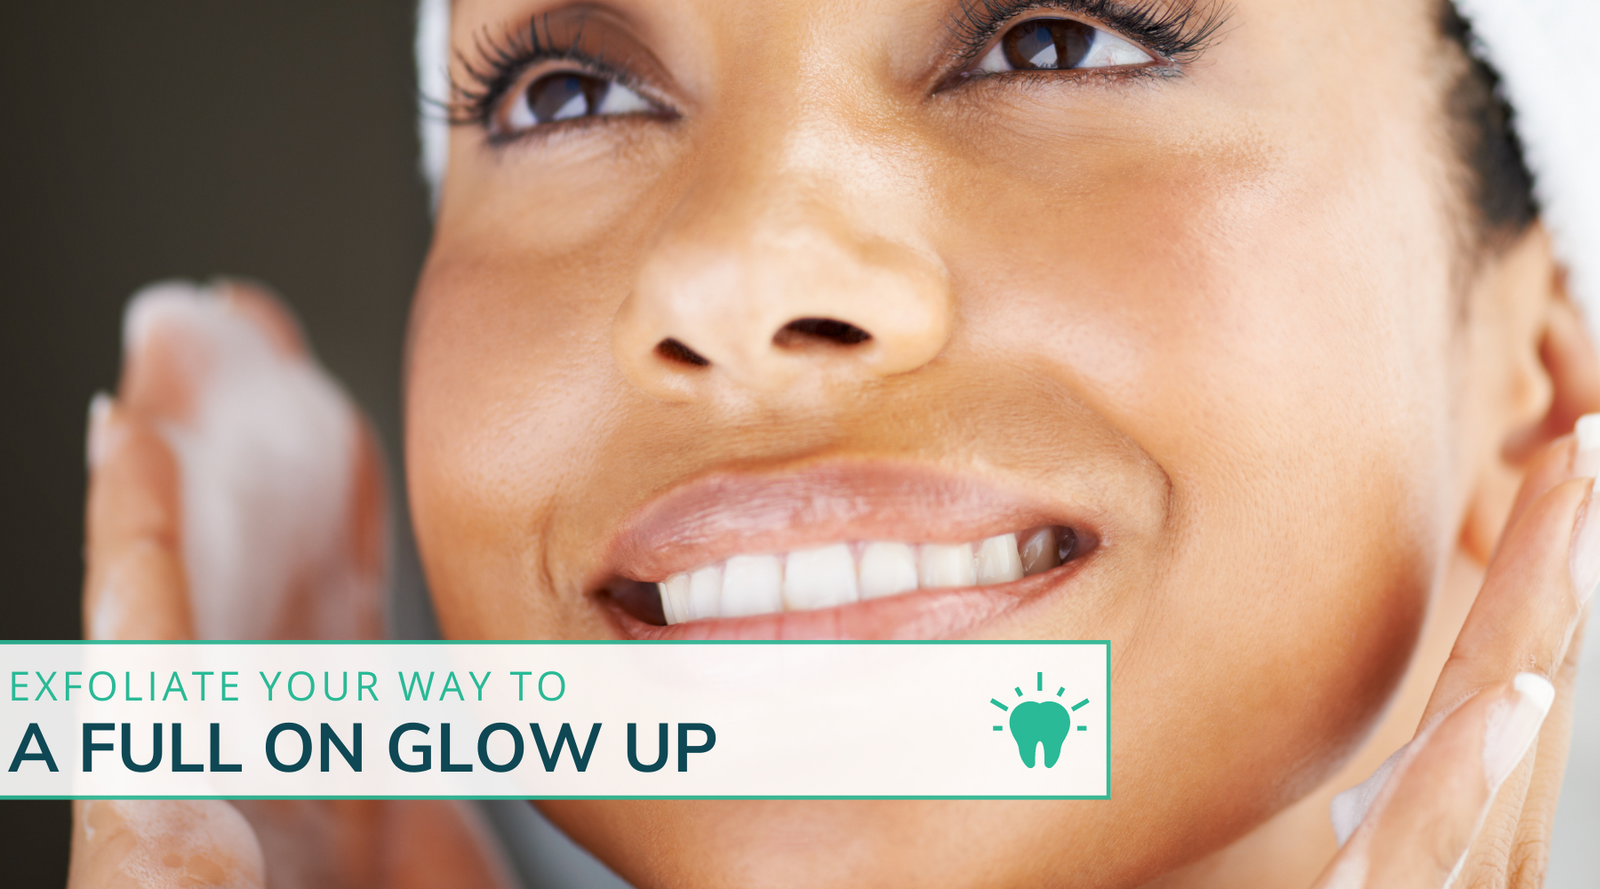 Exfoliate Your Way To A Full On Glow Up